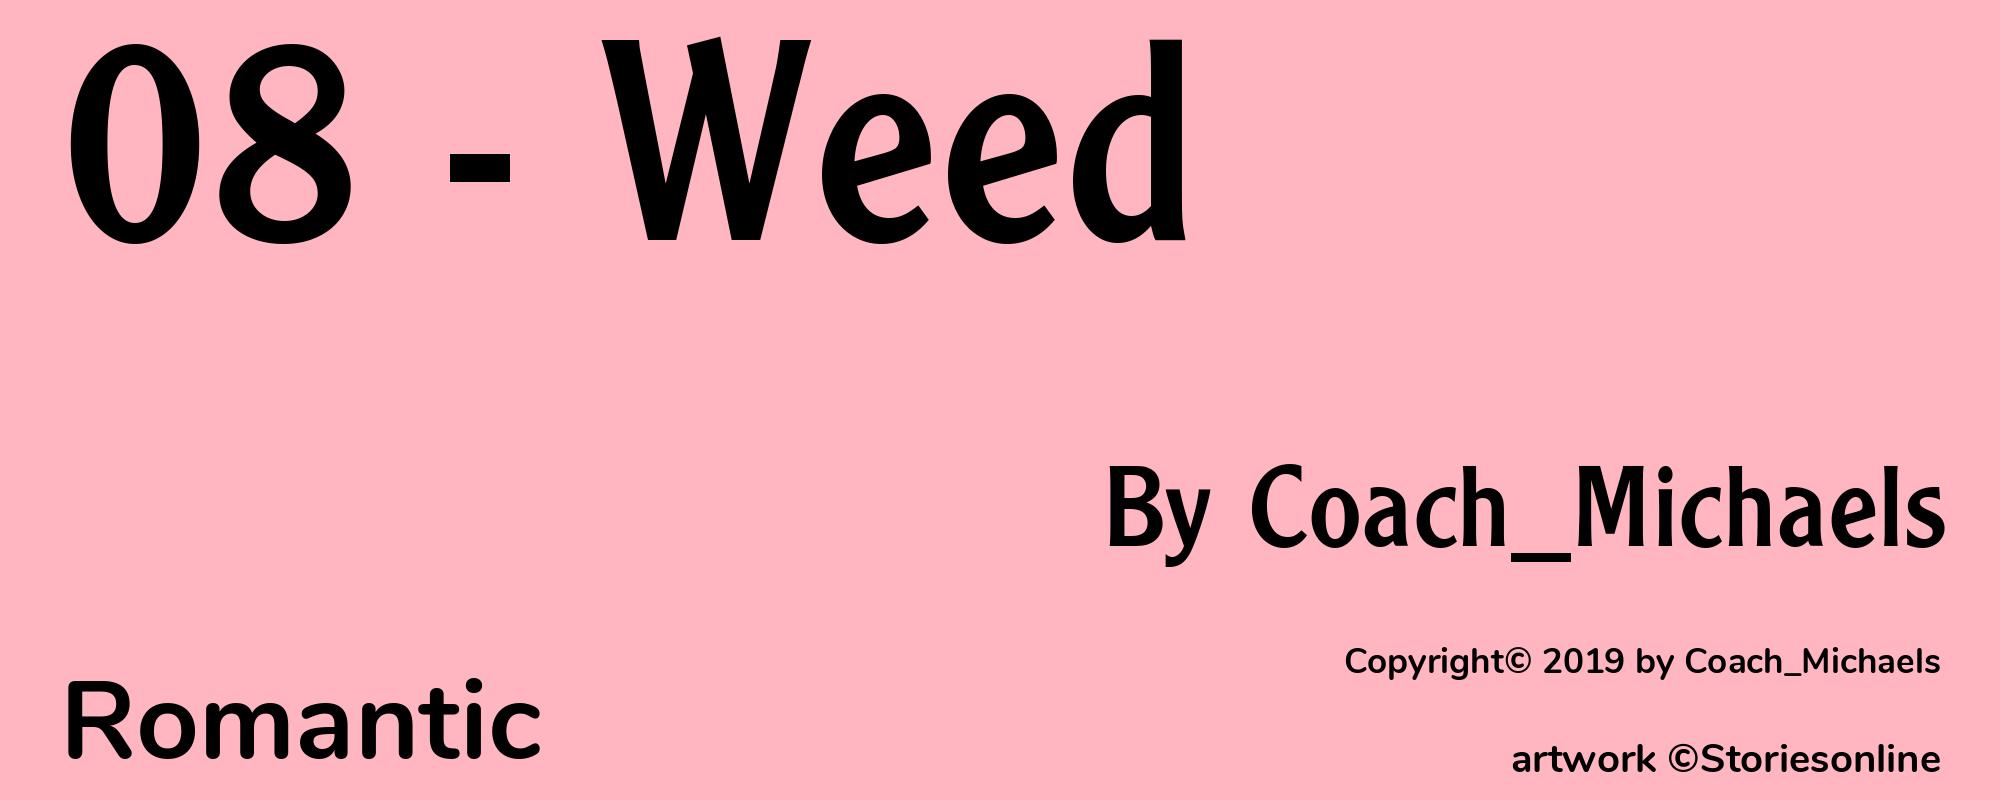 08 - Weed - Cover